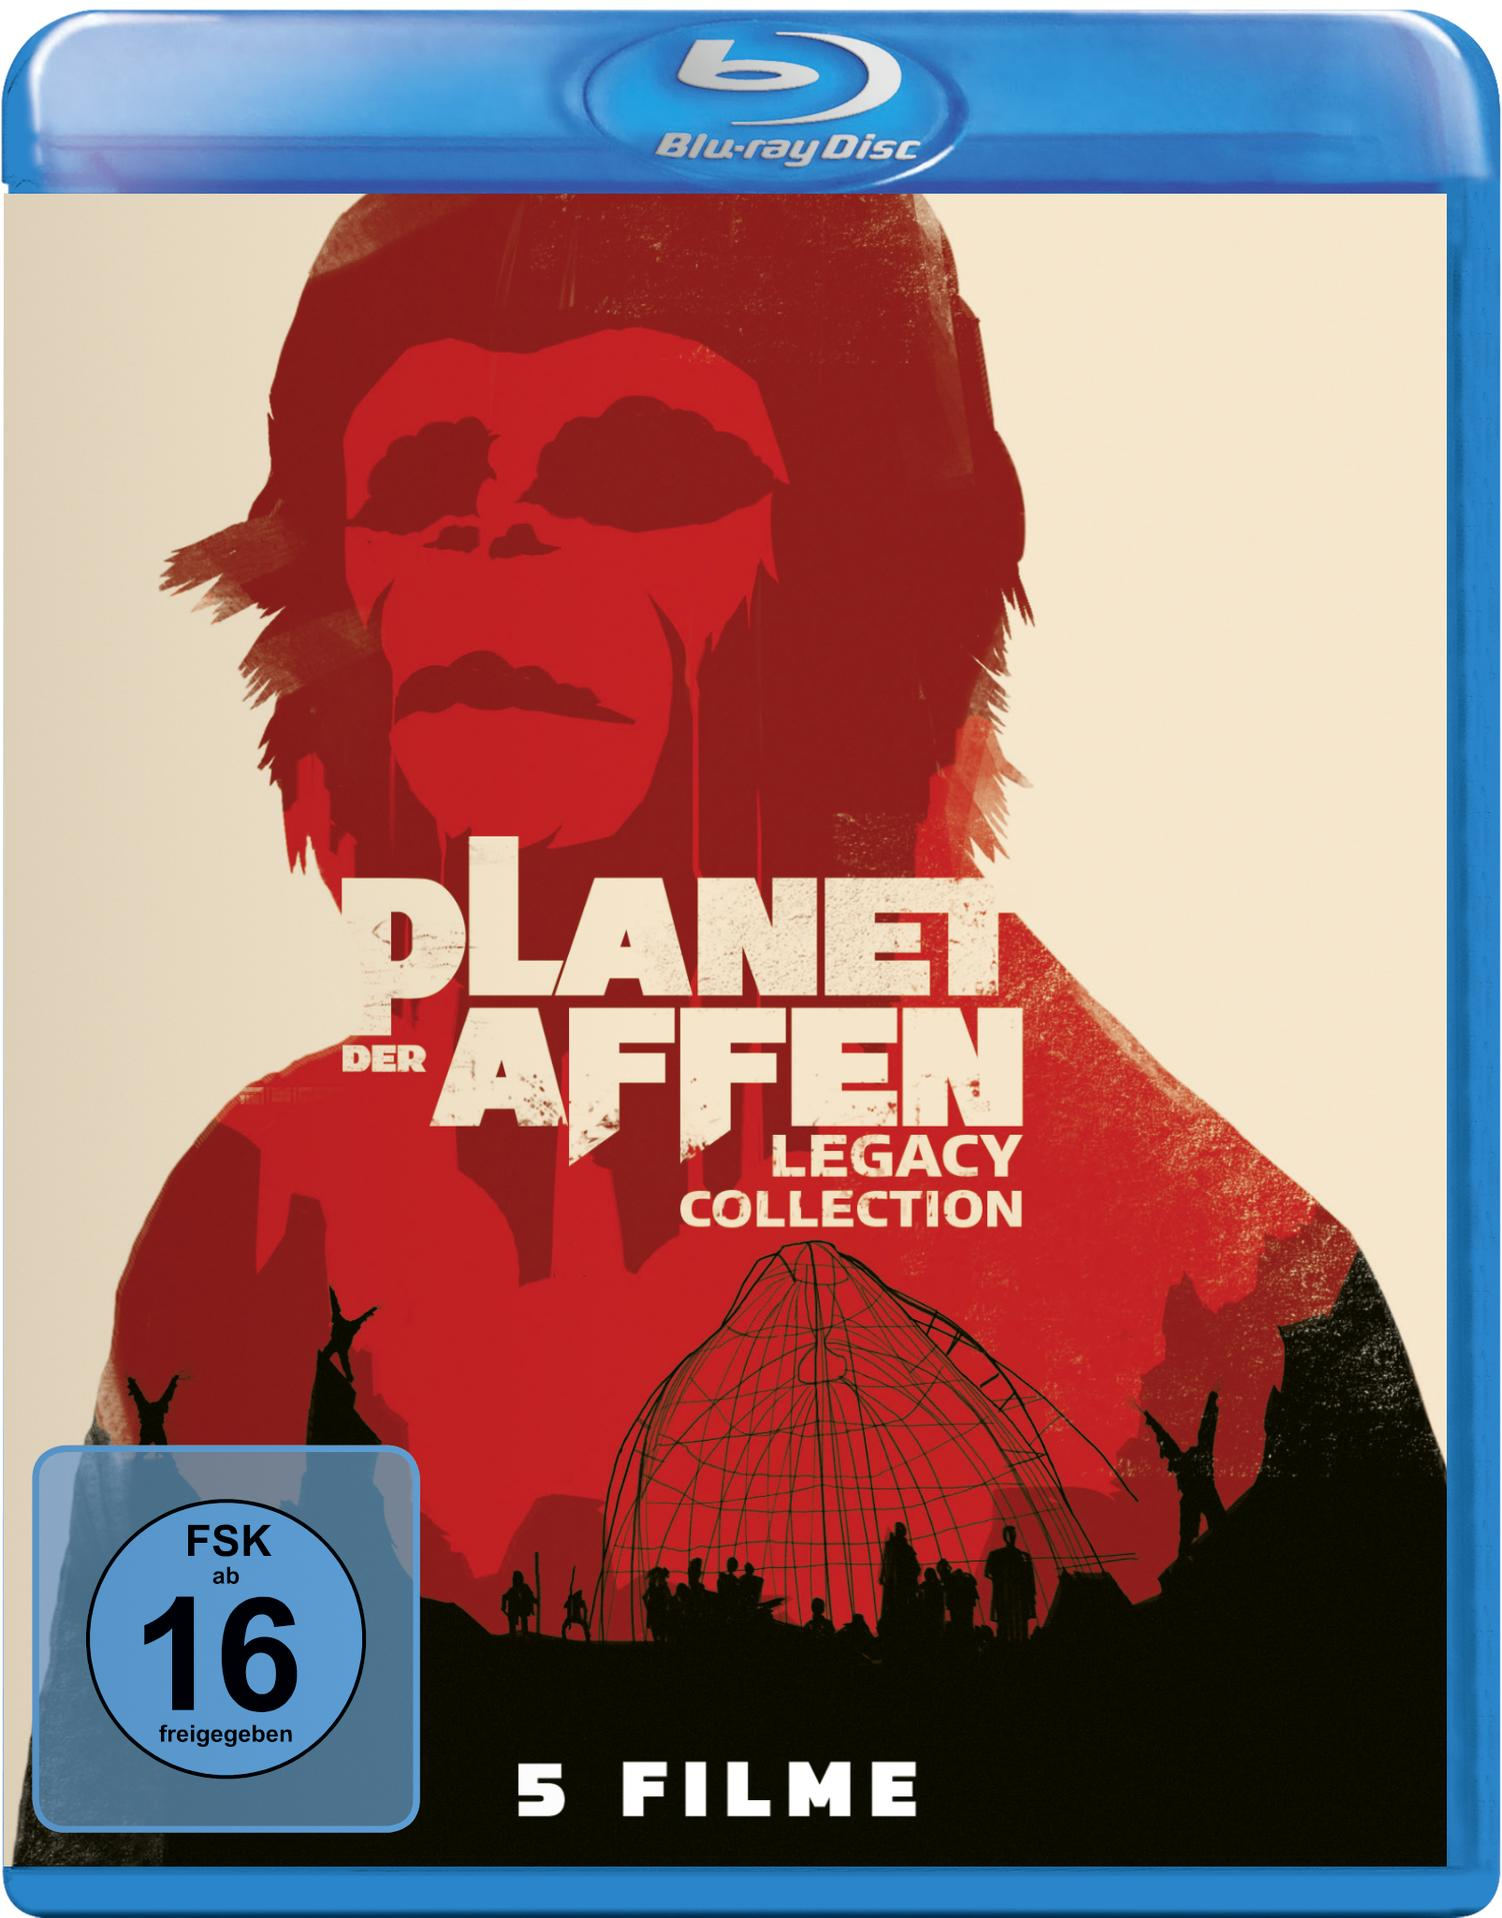 Blu-ray Legacy Affen – Planet Collection der